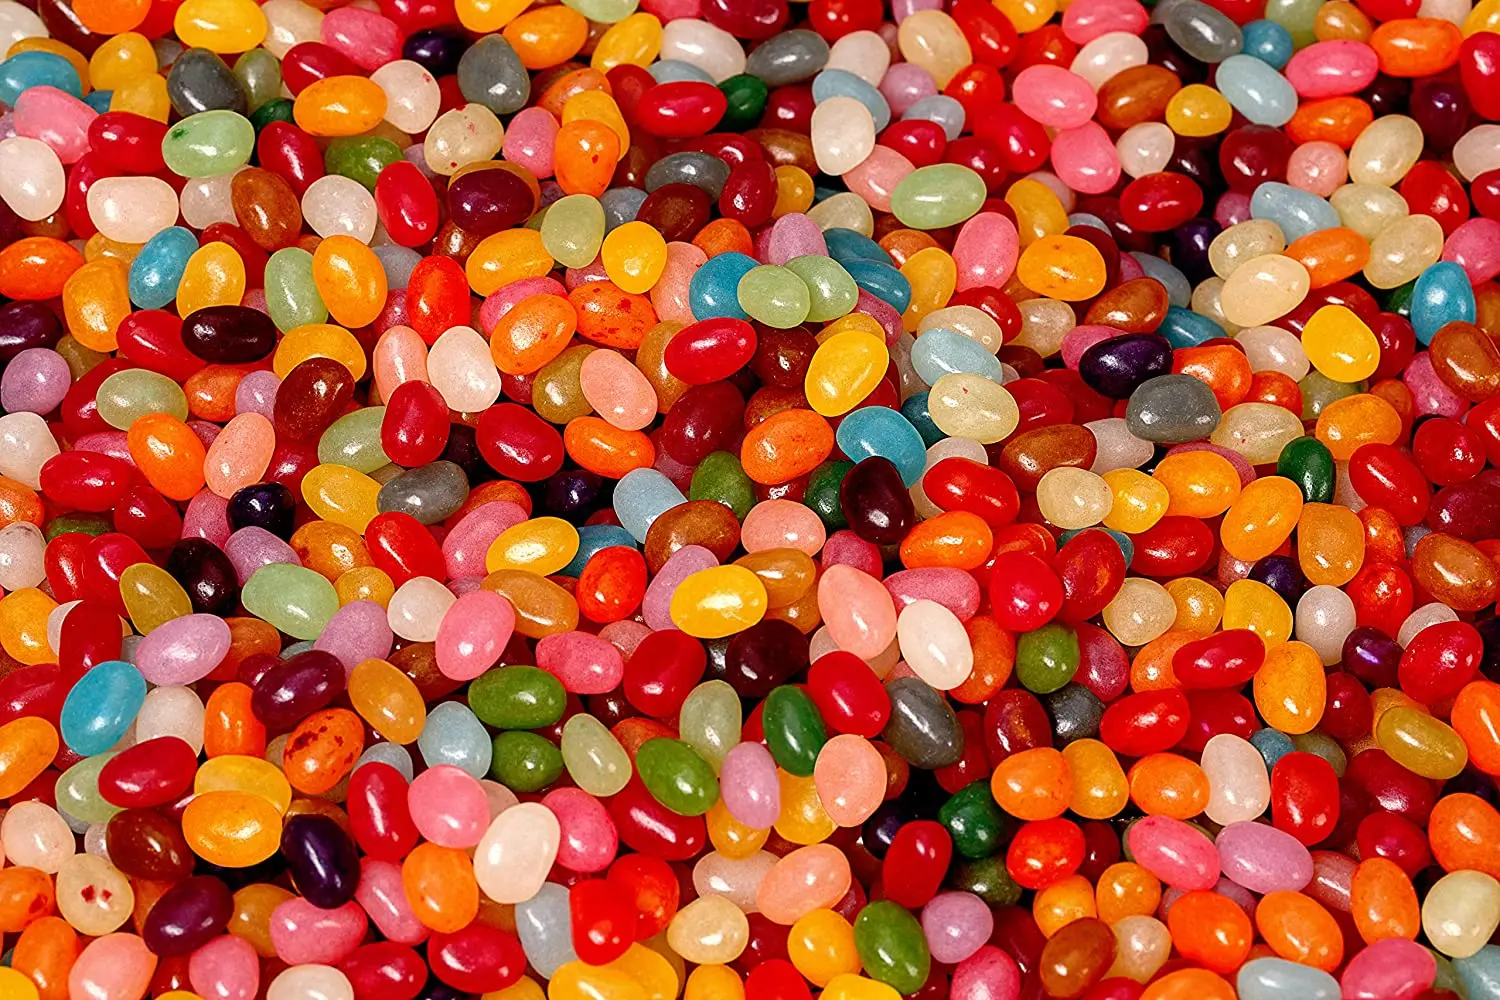 Cheap Bulk Package Rainbow Jelly Bean Soft Candy Confectionery Sweets ...